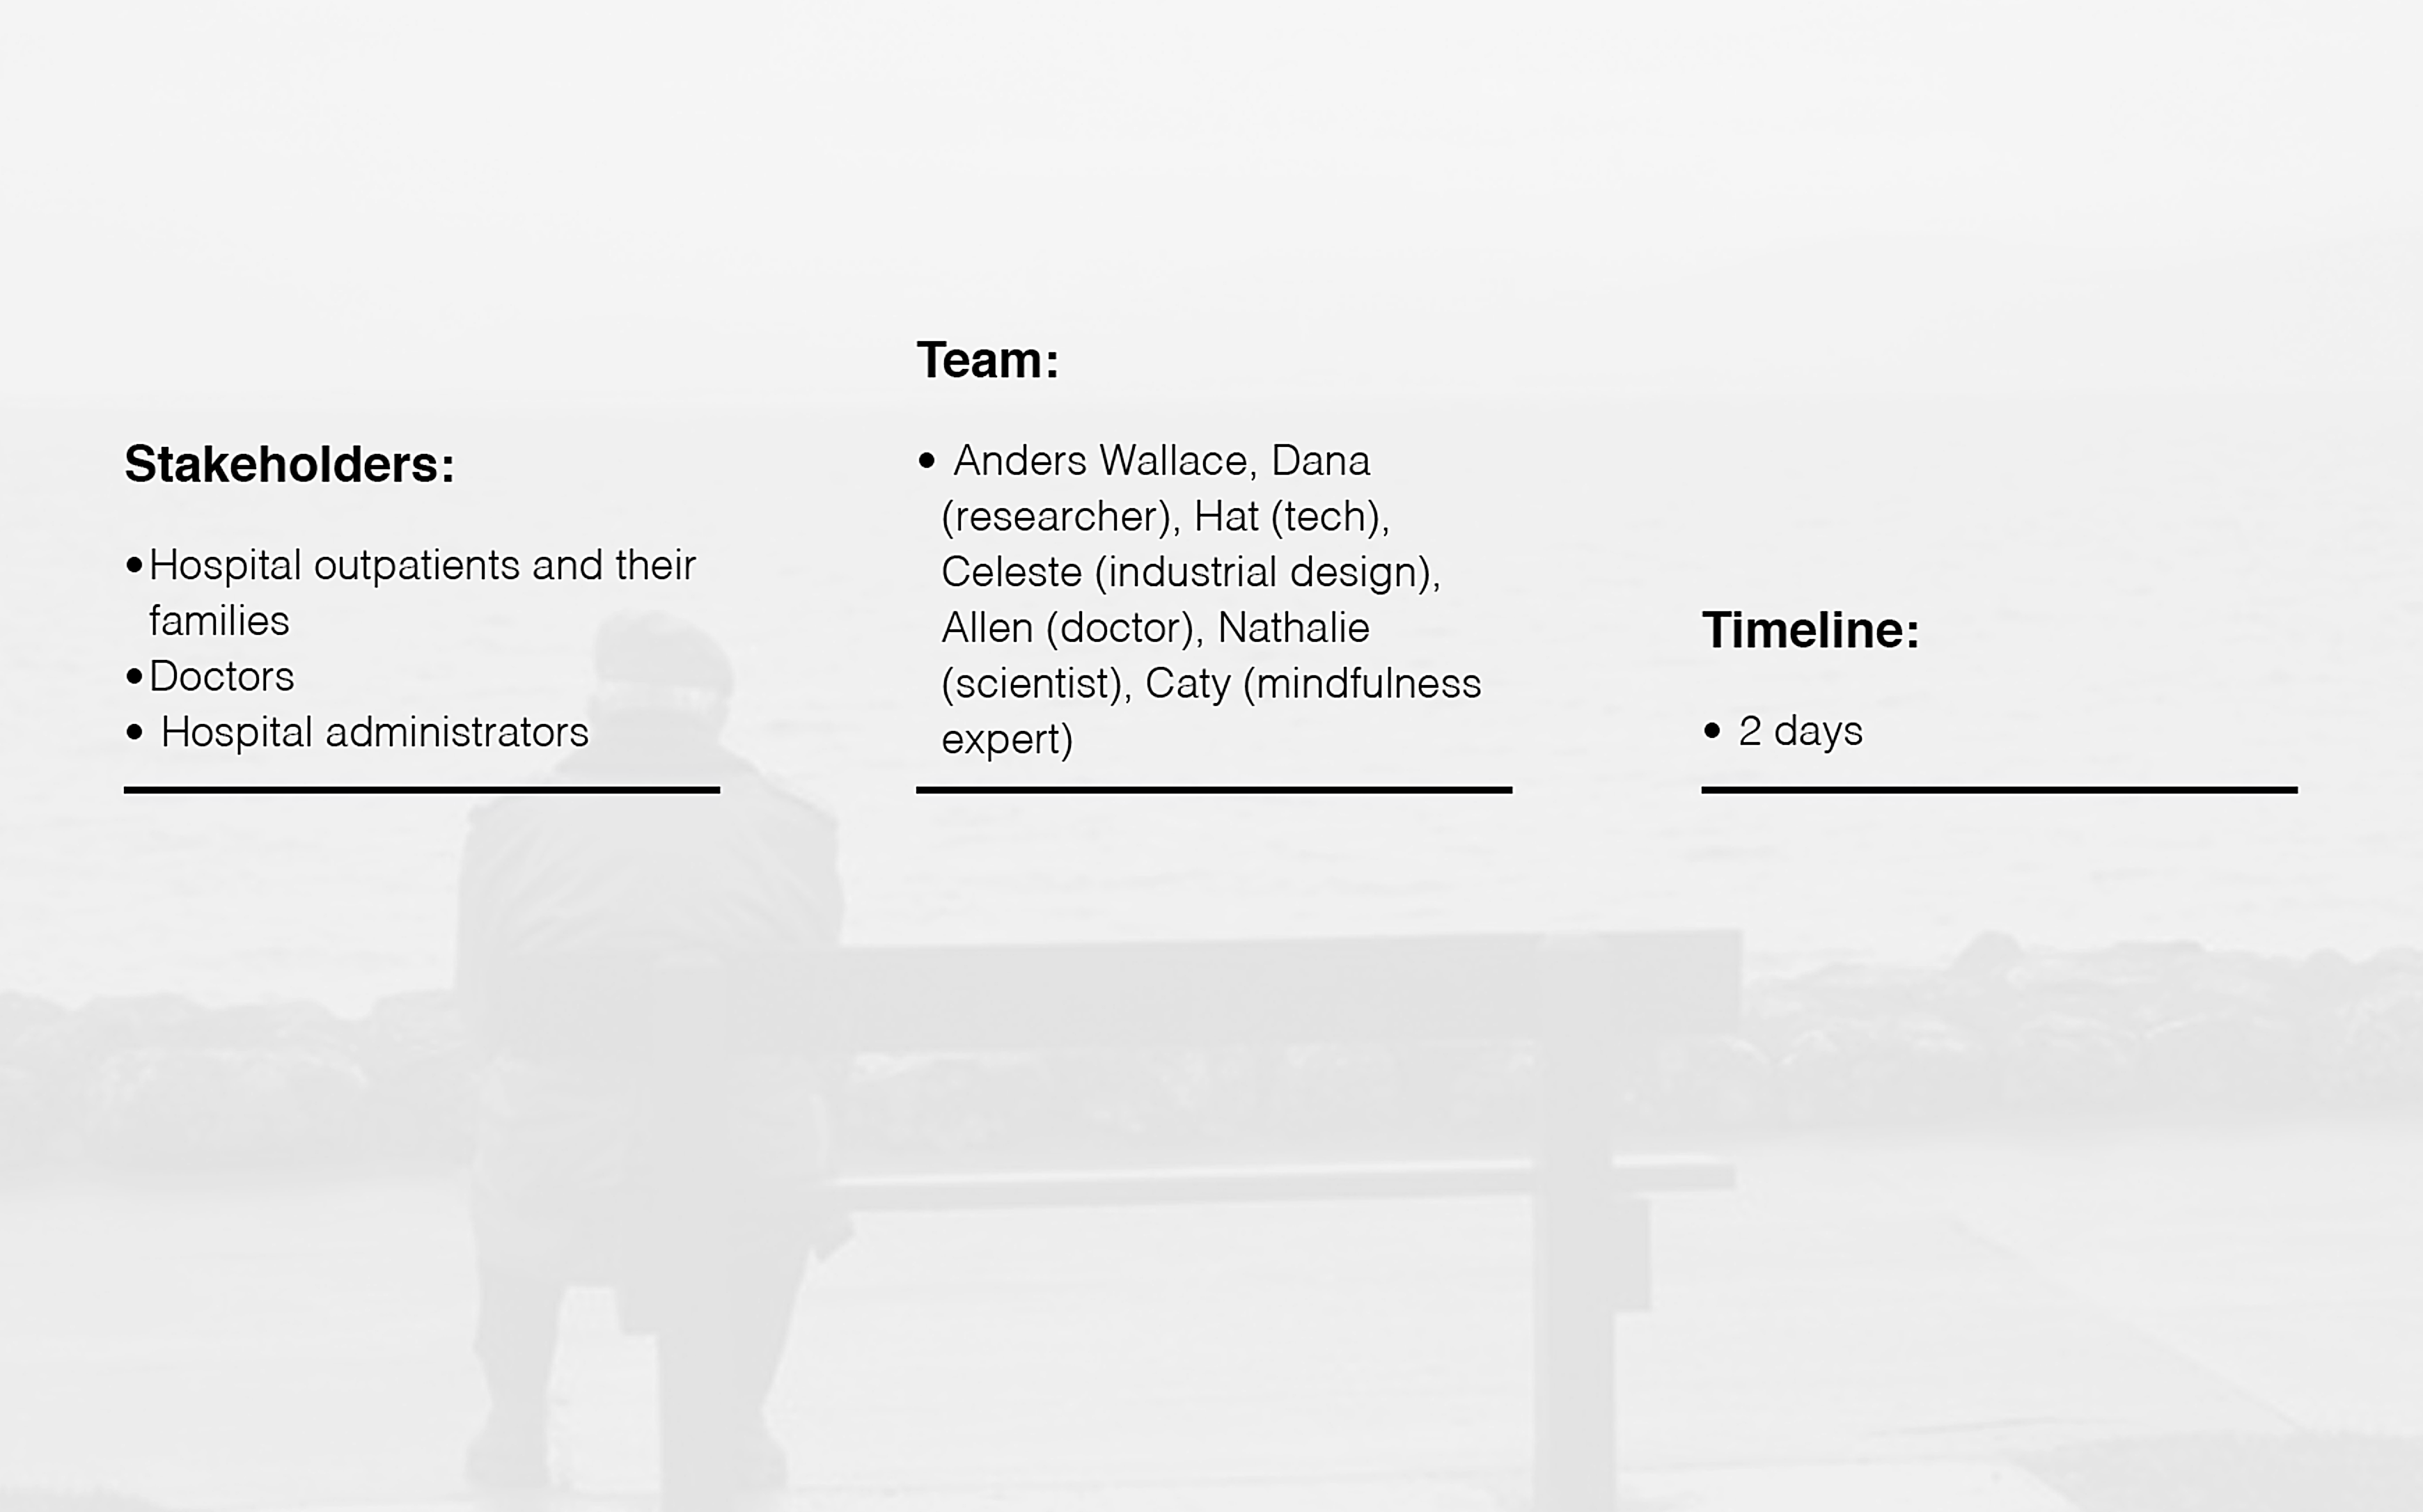 description of the project challenges, the stakeholders, the team members, and the timeline we had to finish the project